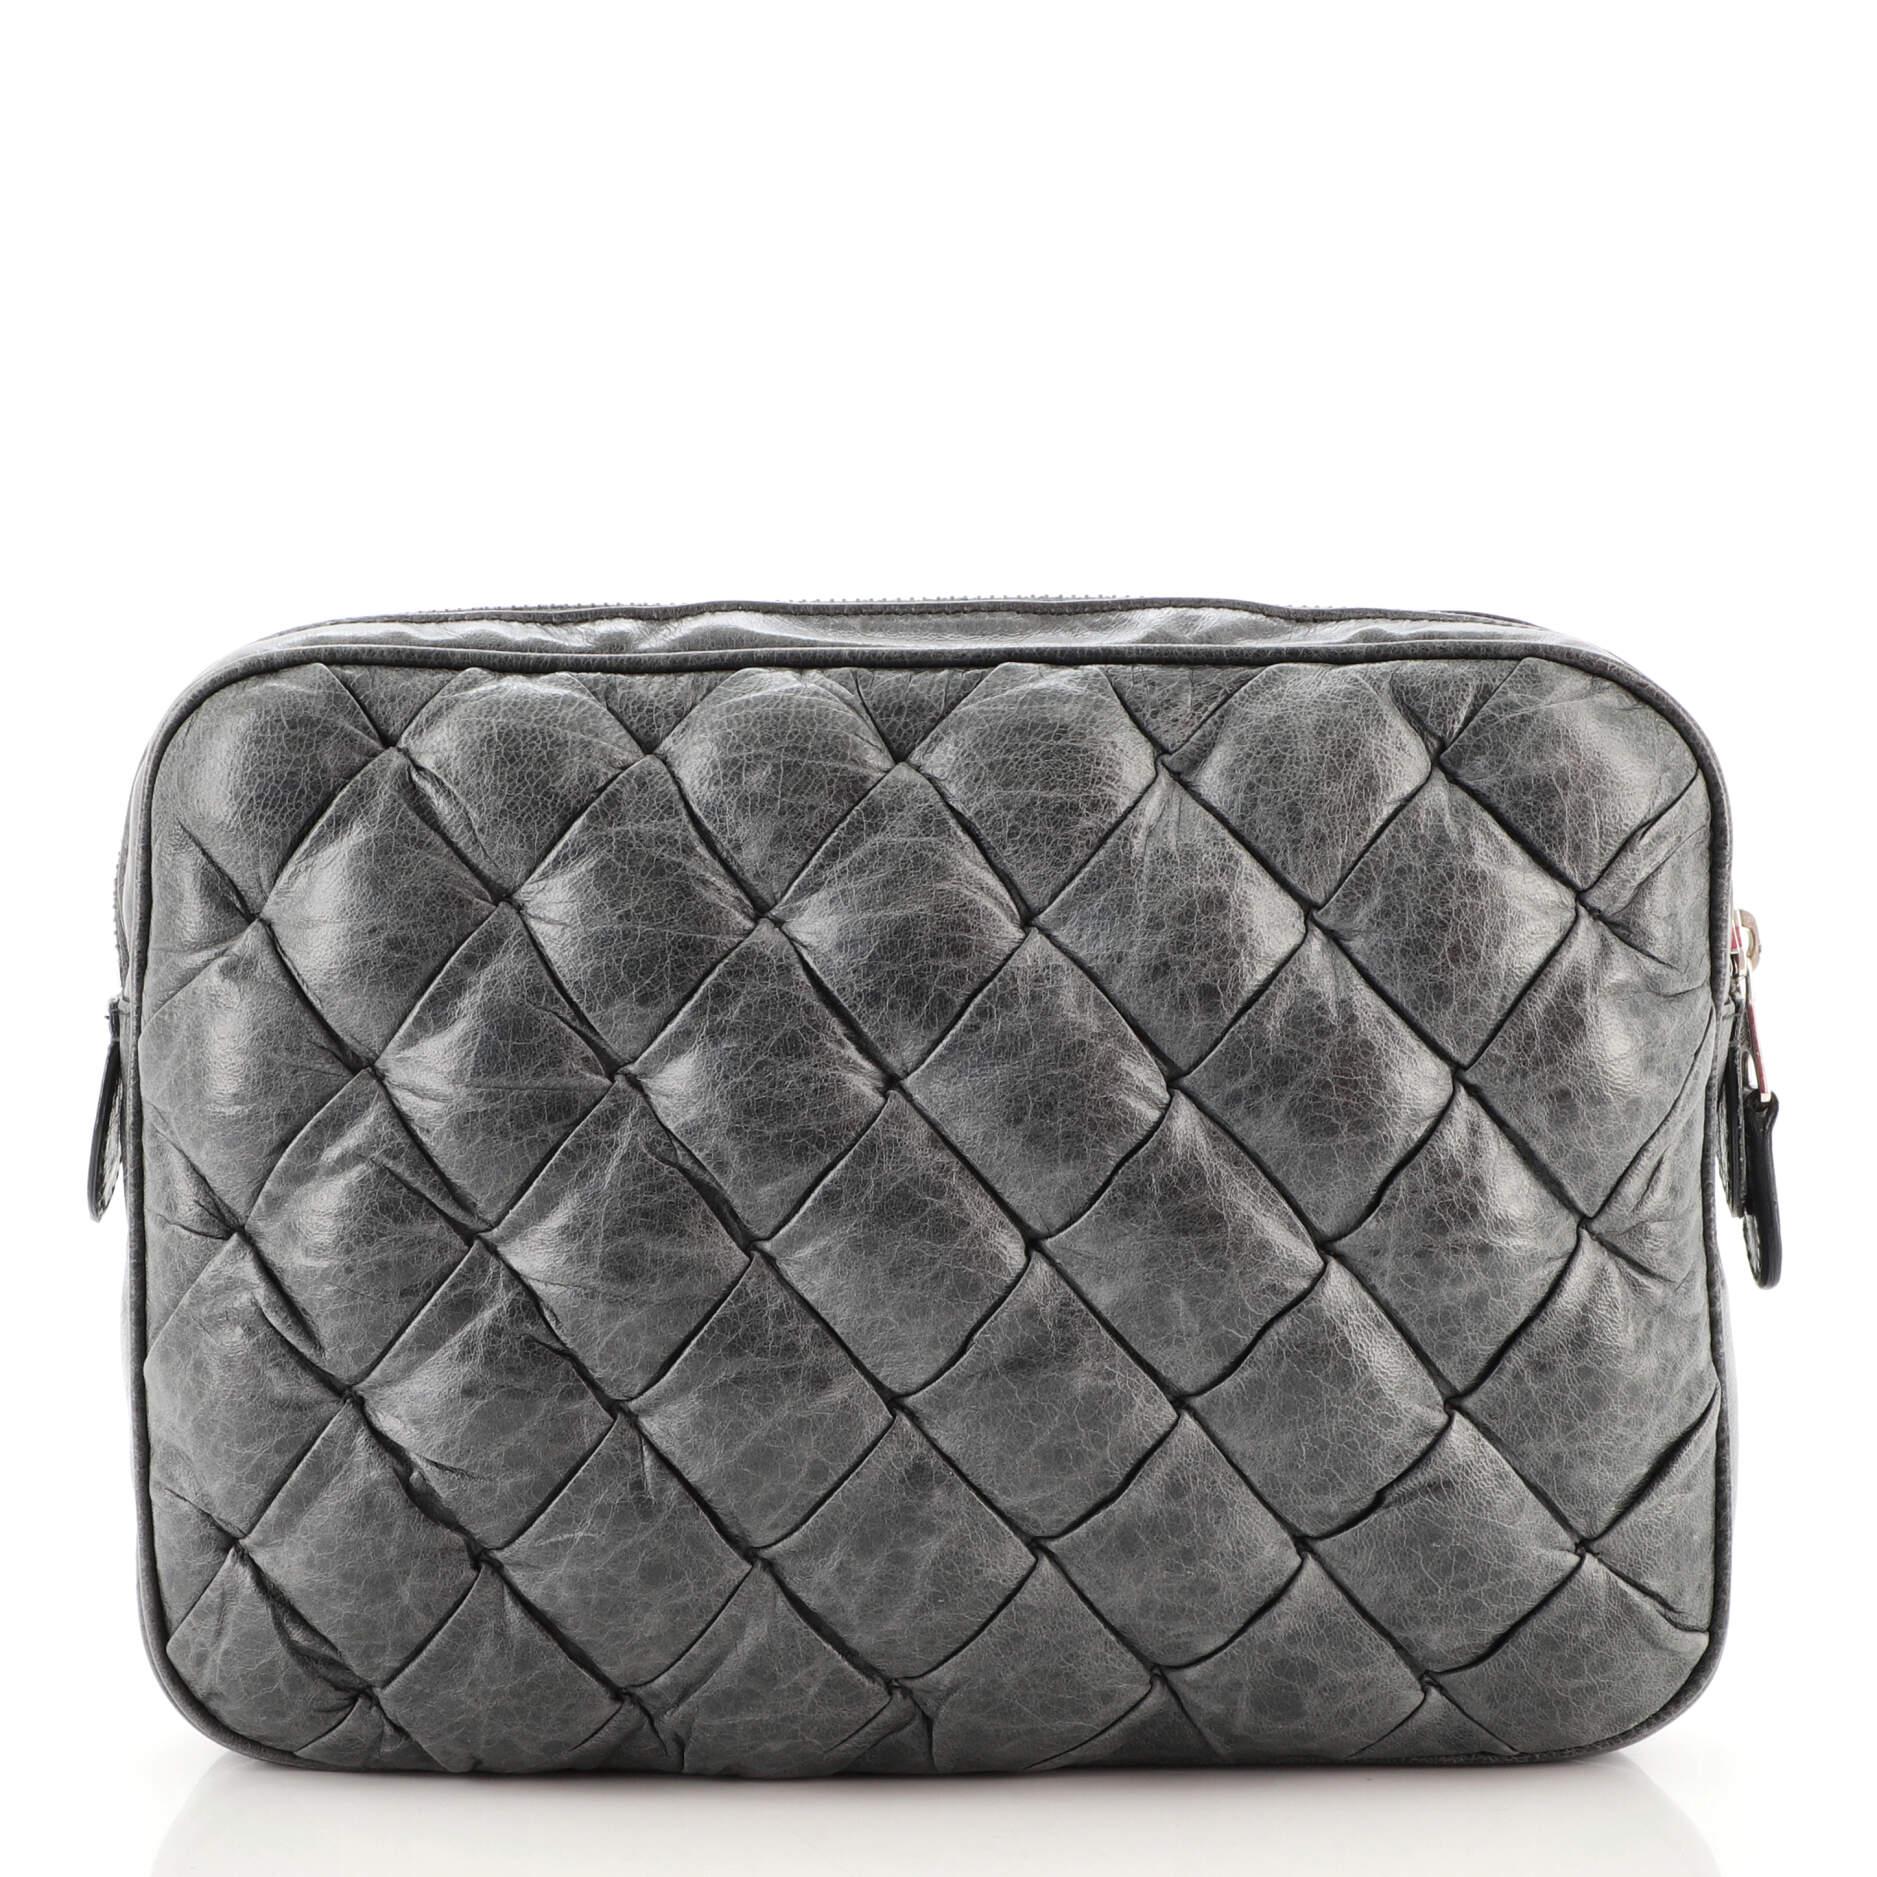 Gray Balenciaga Makeup Clutch Matelasse Leather Large Exterior Material: Leath